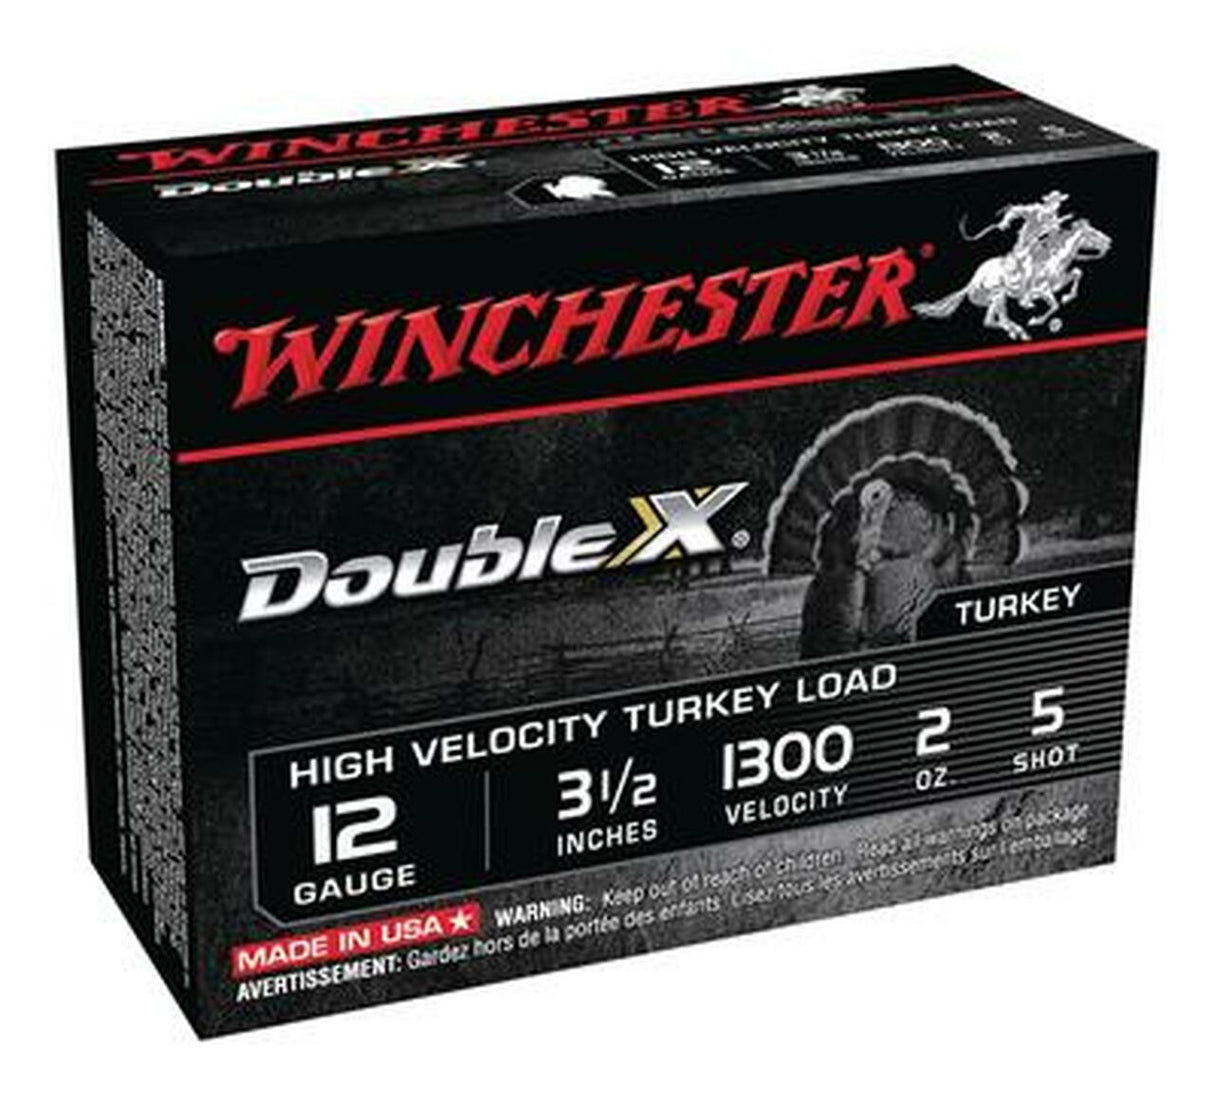 Winchester Double X High Velocity Turkey Loads Copper Plated Buffered 12 Gauge 3.5" 1300 FPS 2oz. 5 Shot